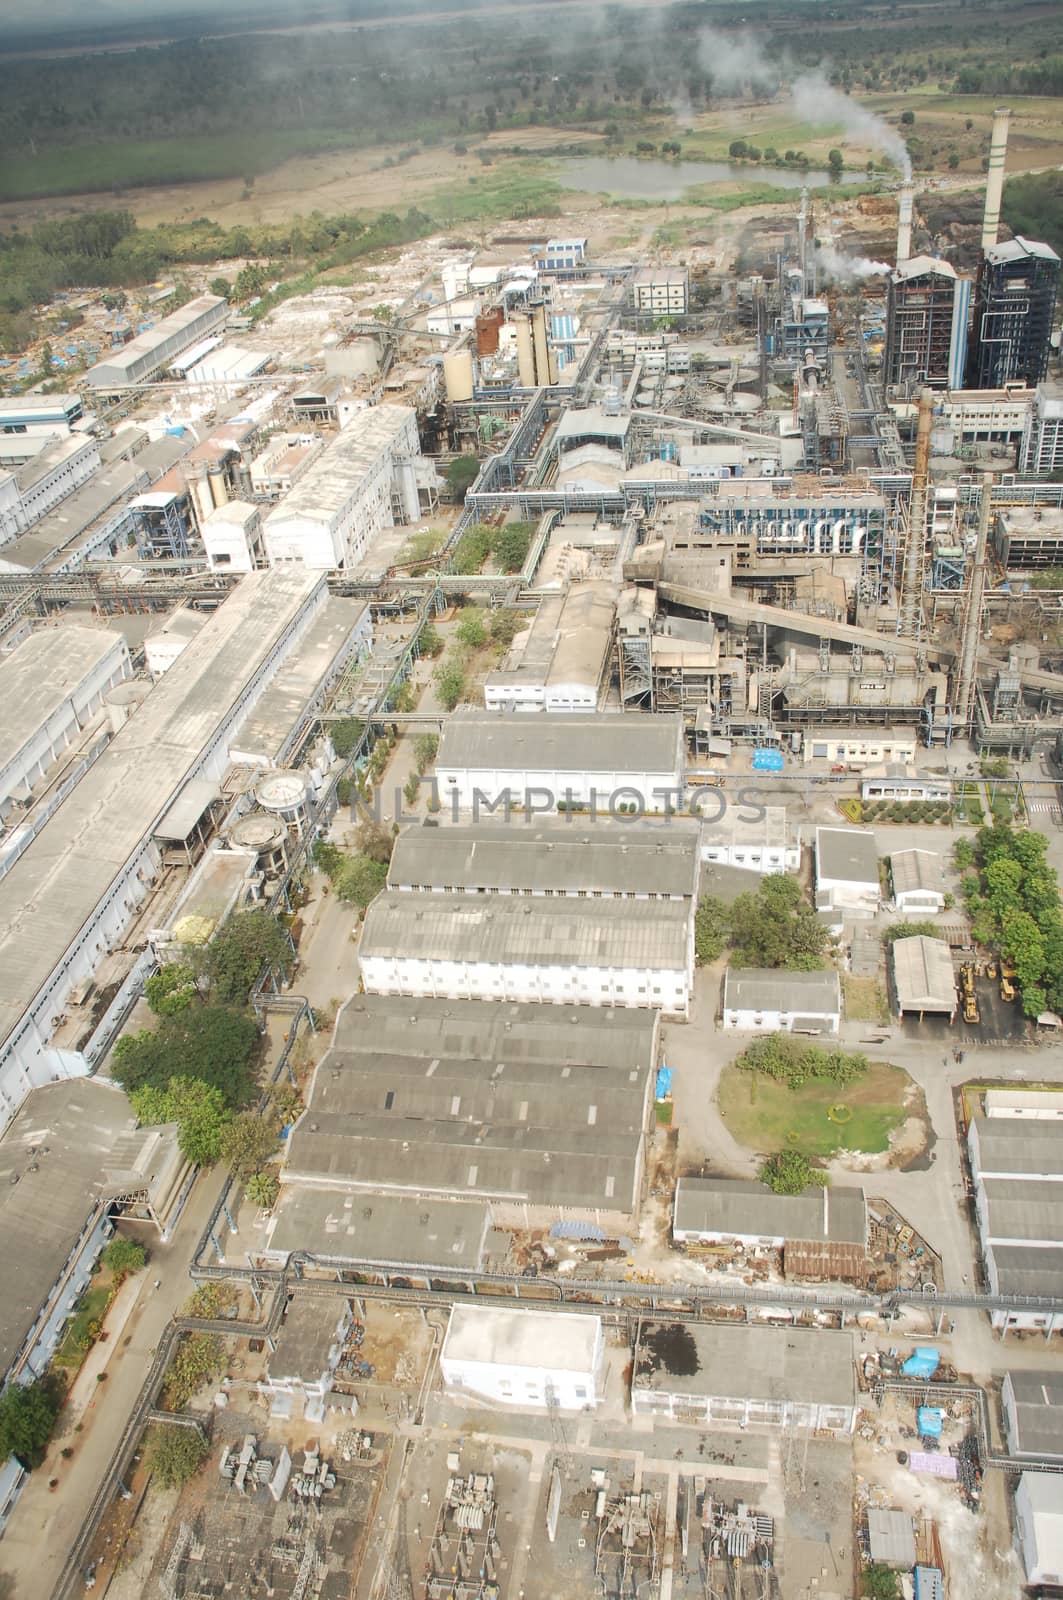 Aerial view of a buildings